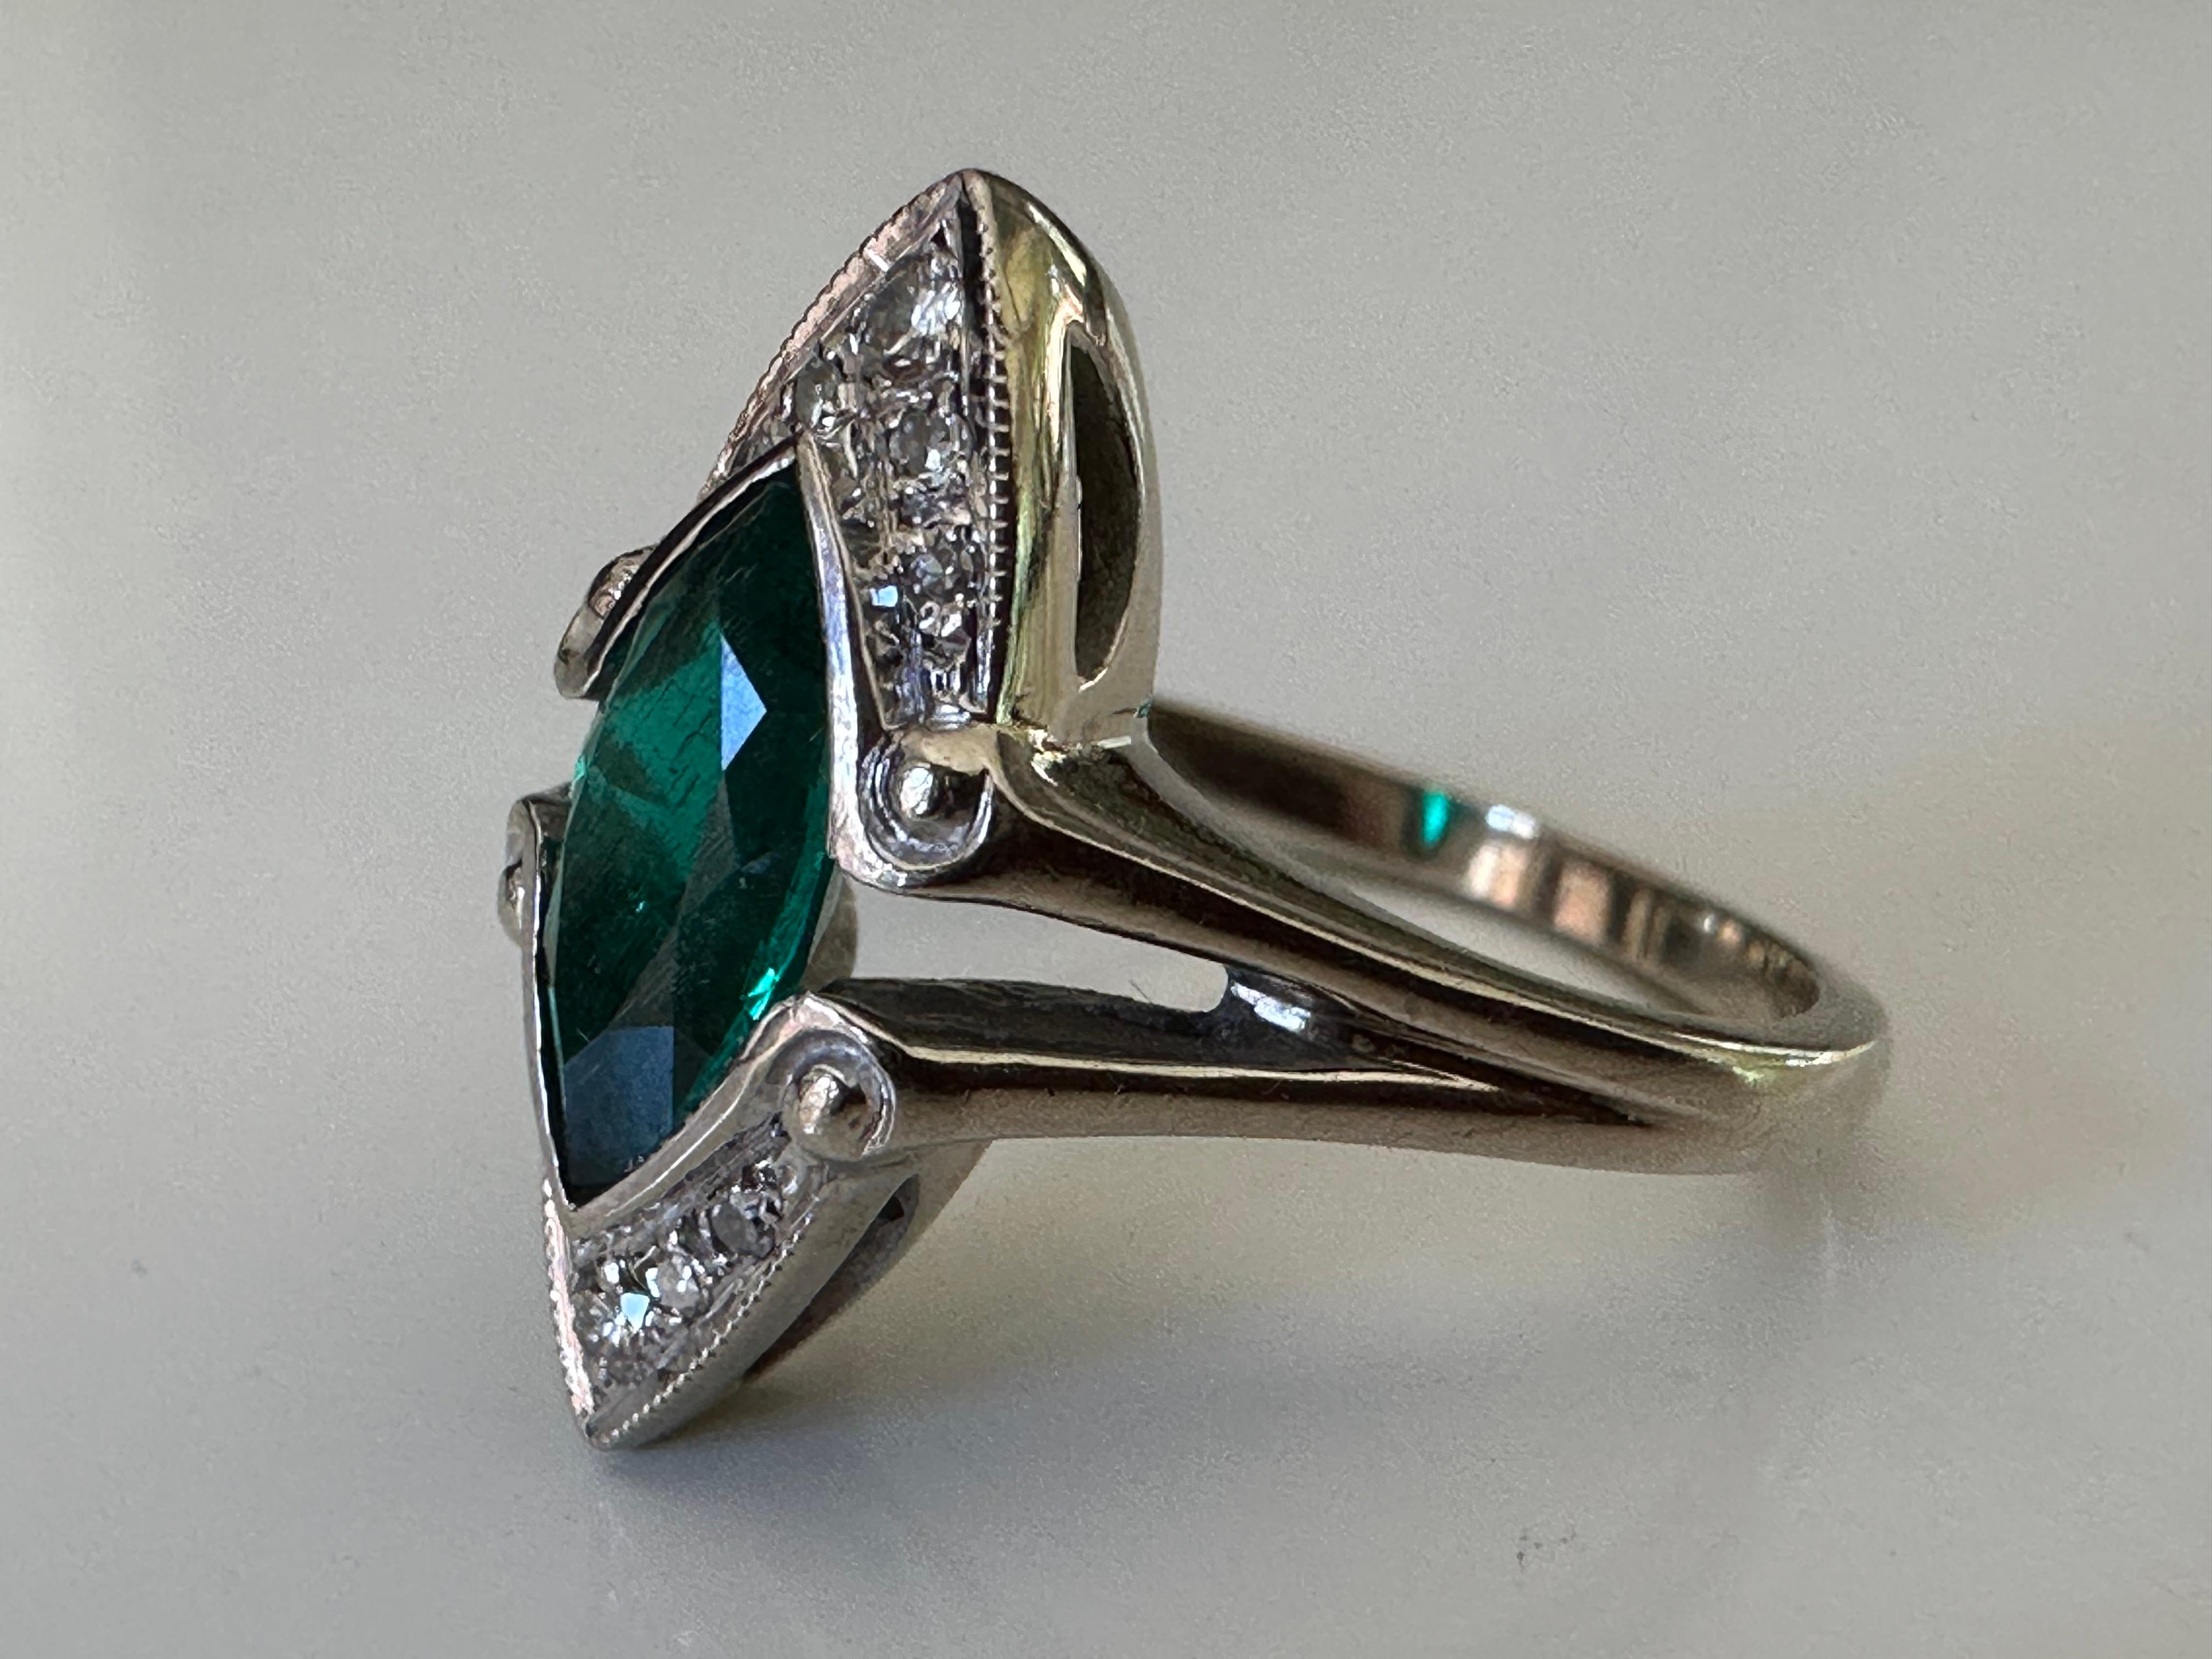 Crafted in the 1940s, this retro ring features an approximately 1.00-carat marquise-cut natural green emerald center stone surrounded by ten single cut and Old European cut diamonds totaling approximately 0.15 carats in a navette-shaped setting with